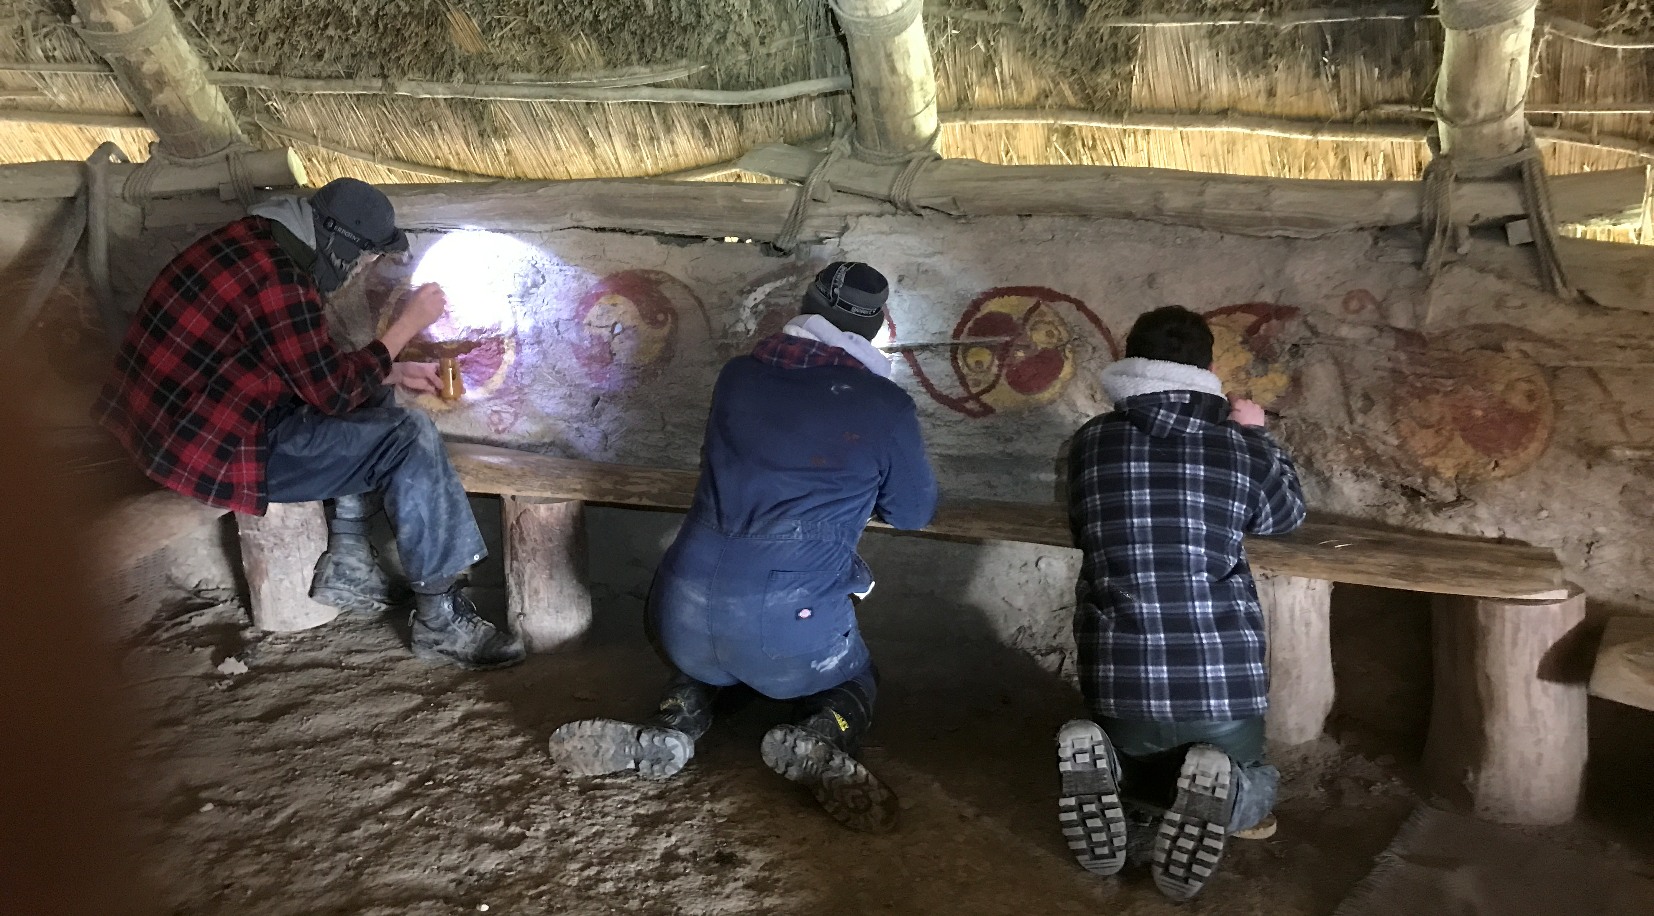 Painting an IronAge Roundhouse with Claypaint